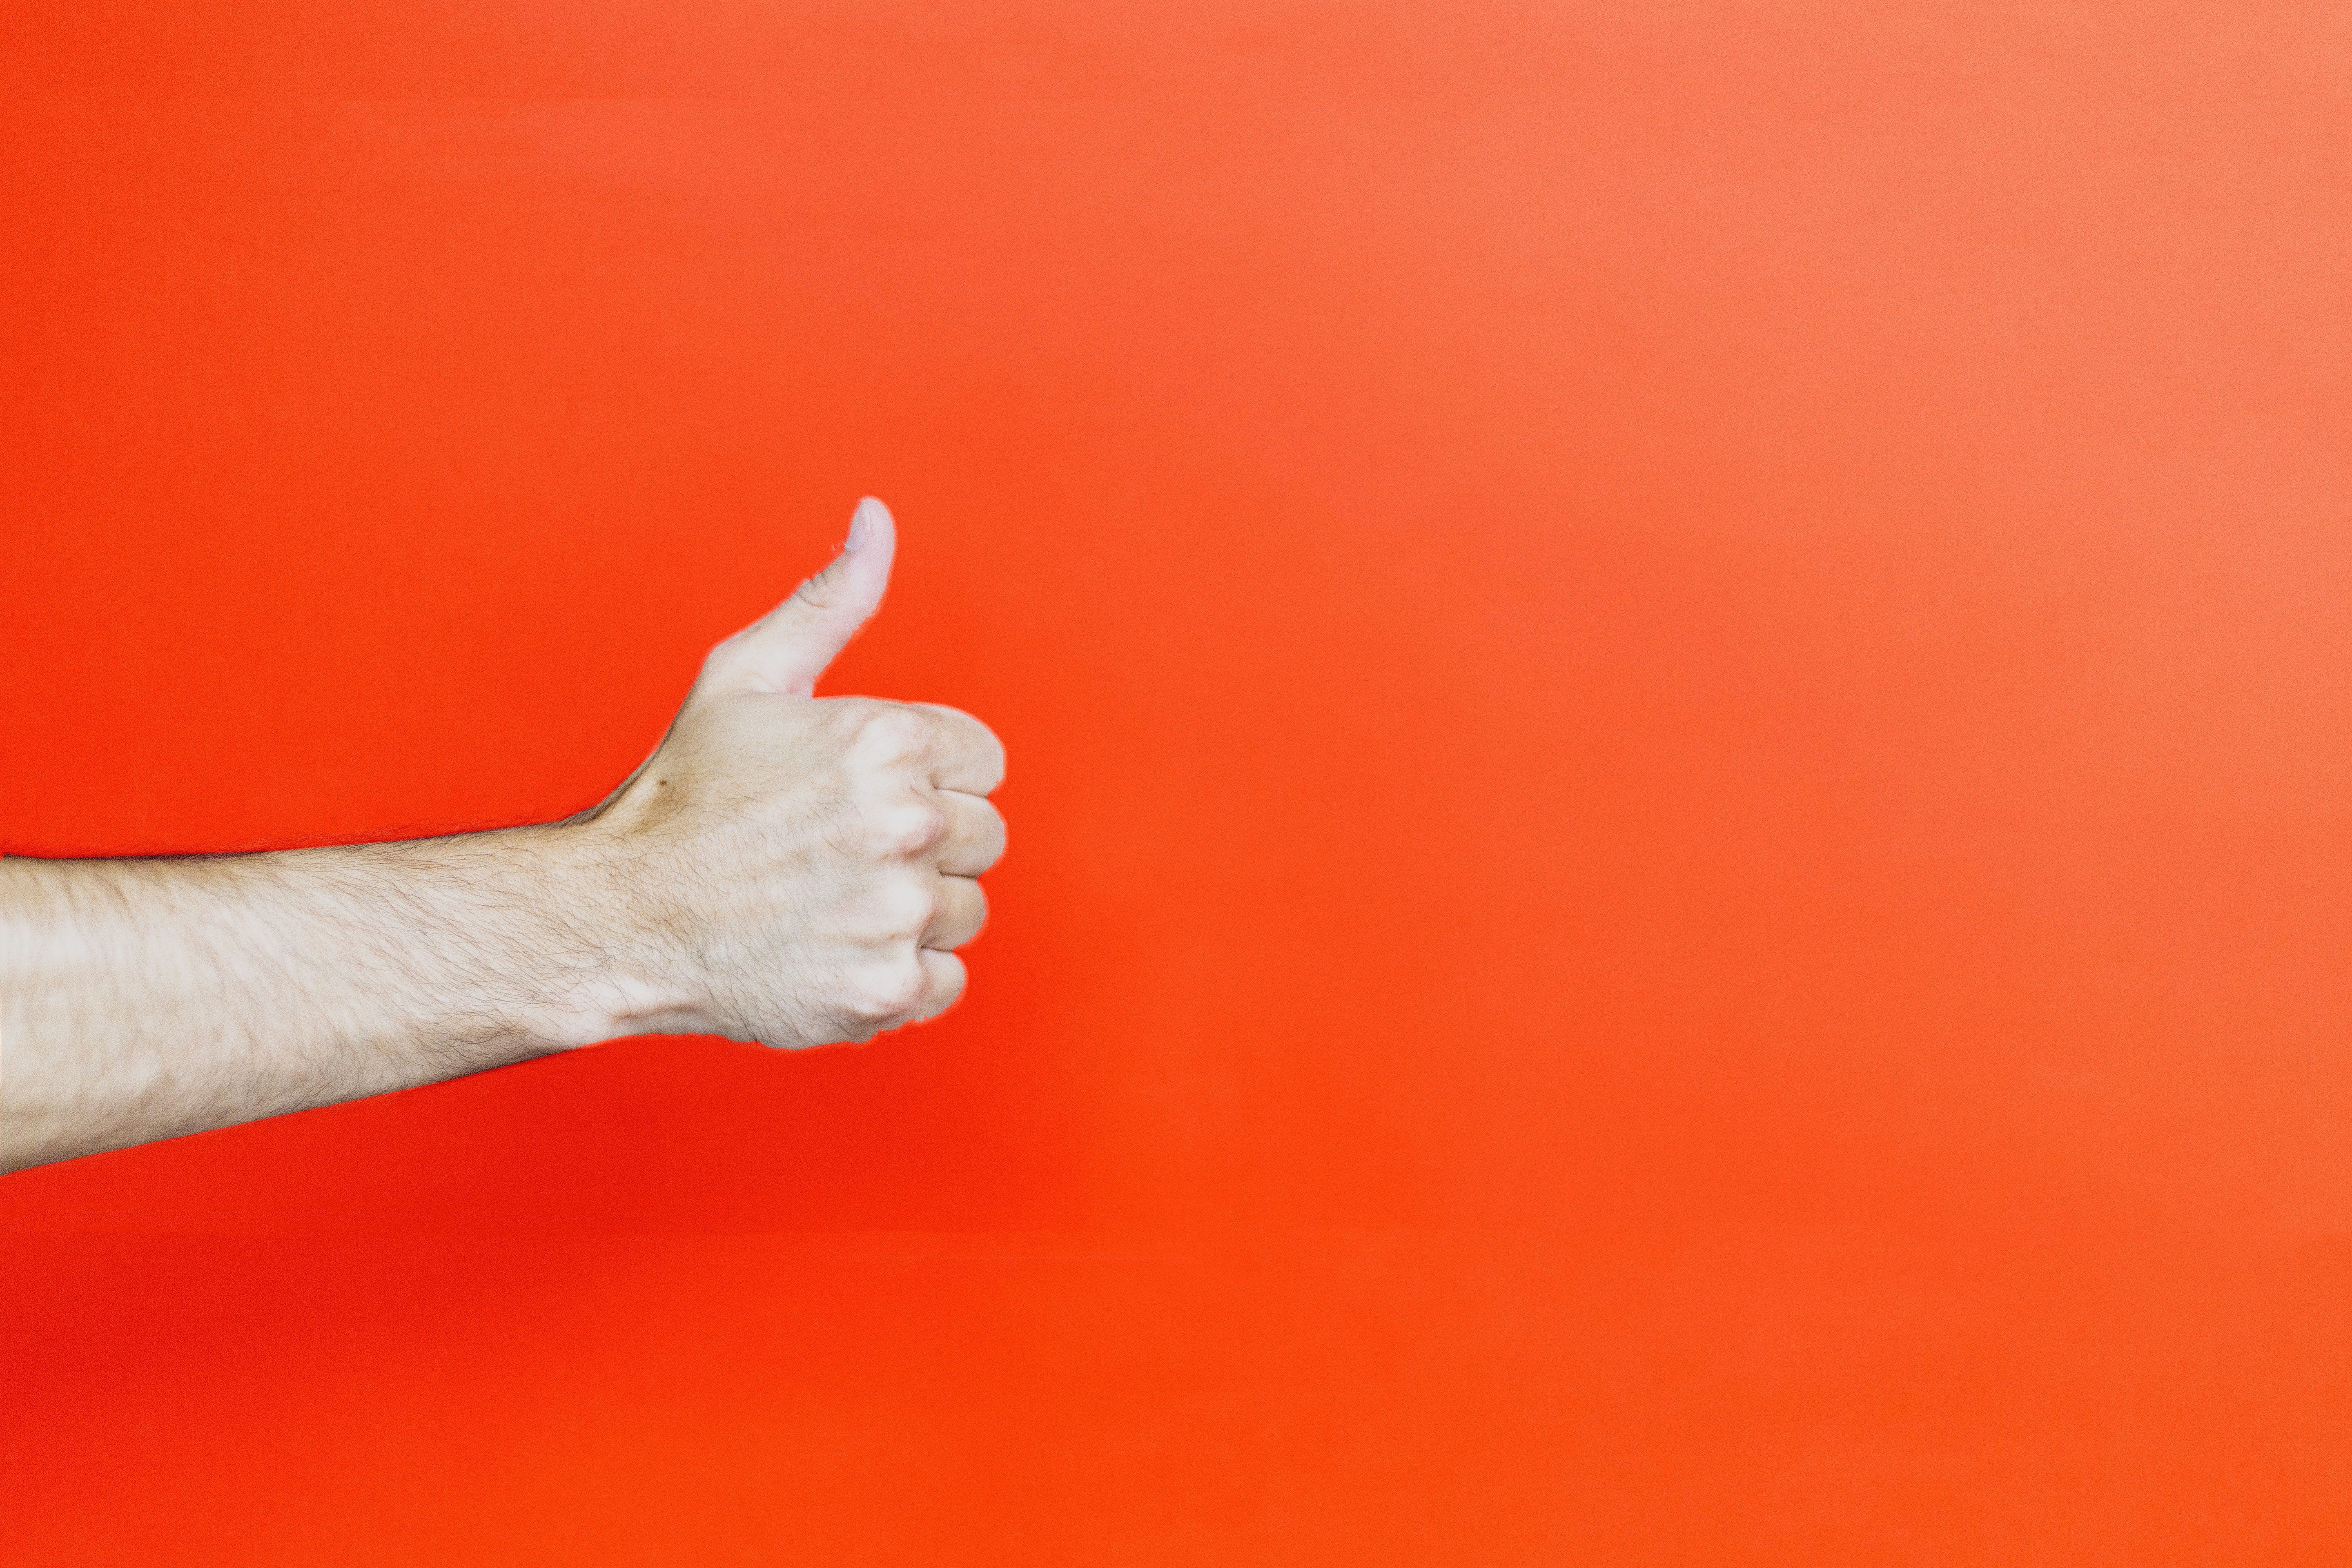 thumbs up on red background